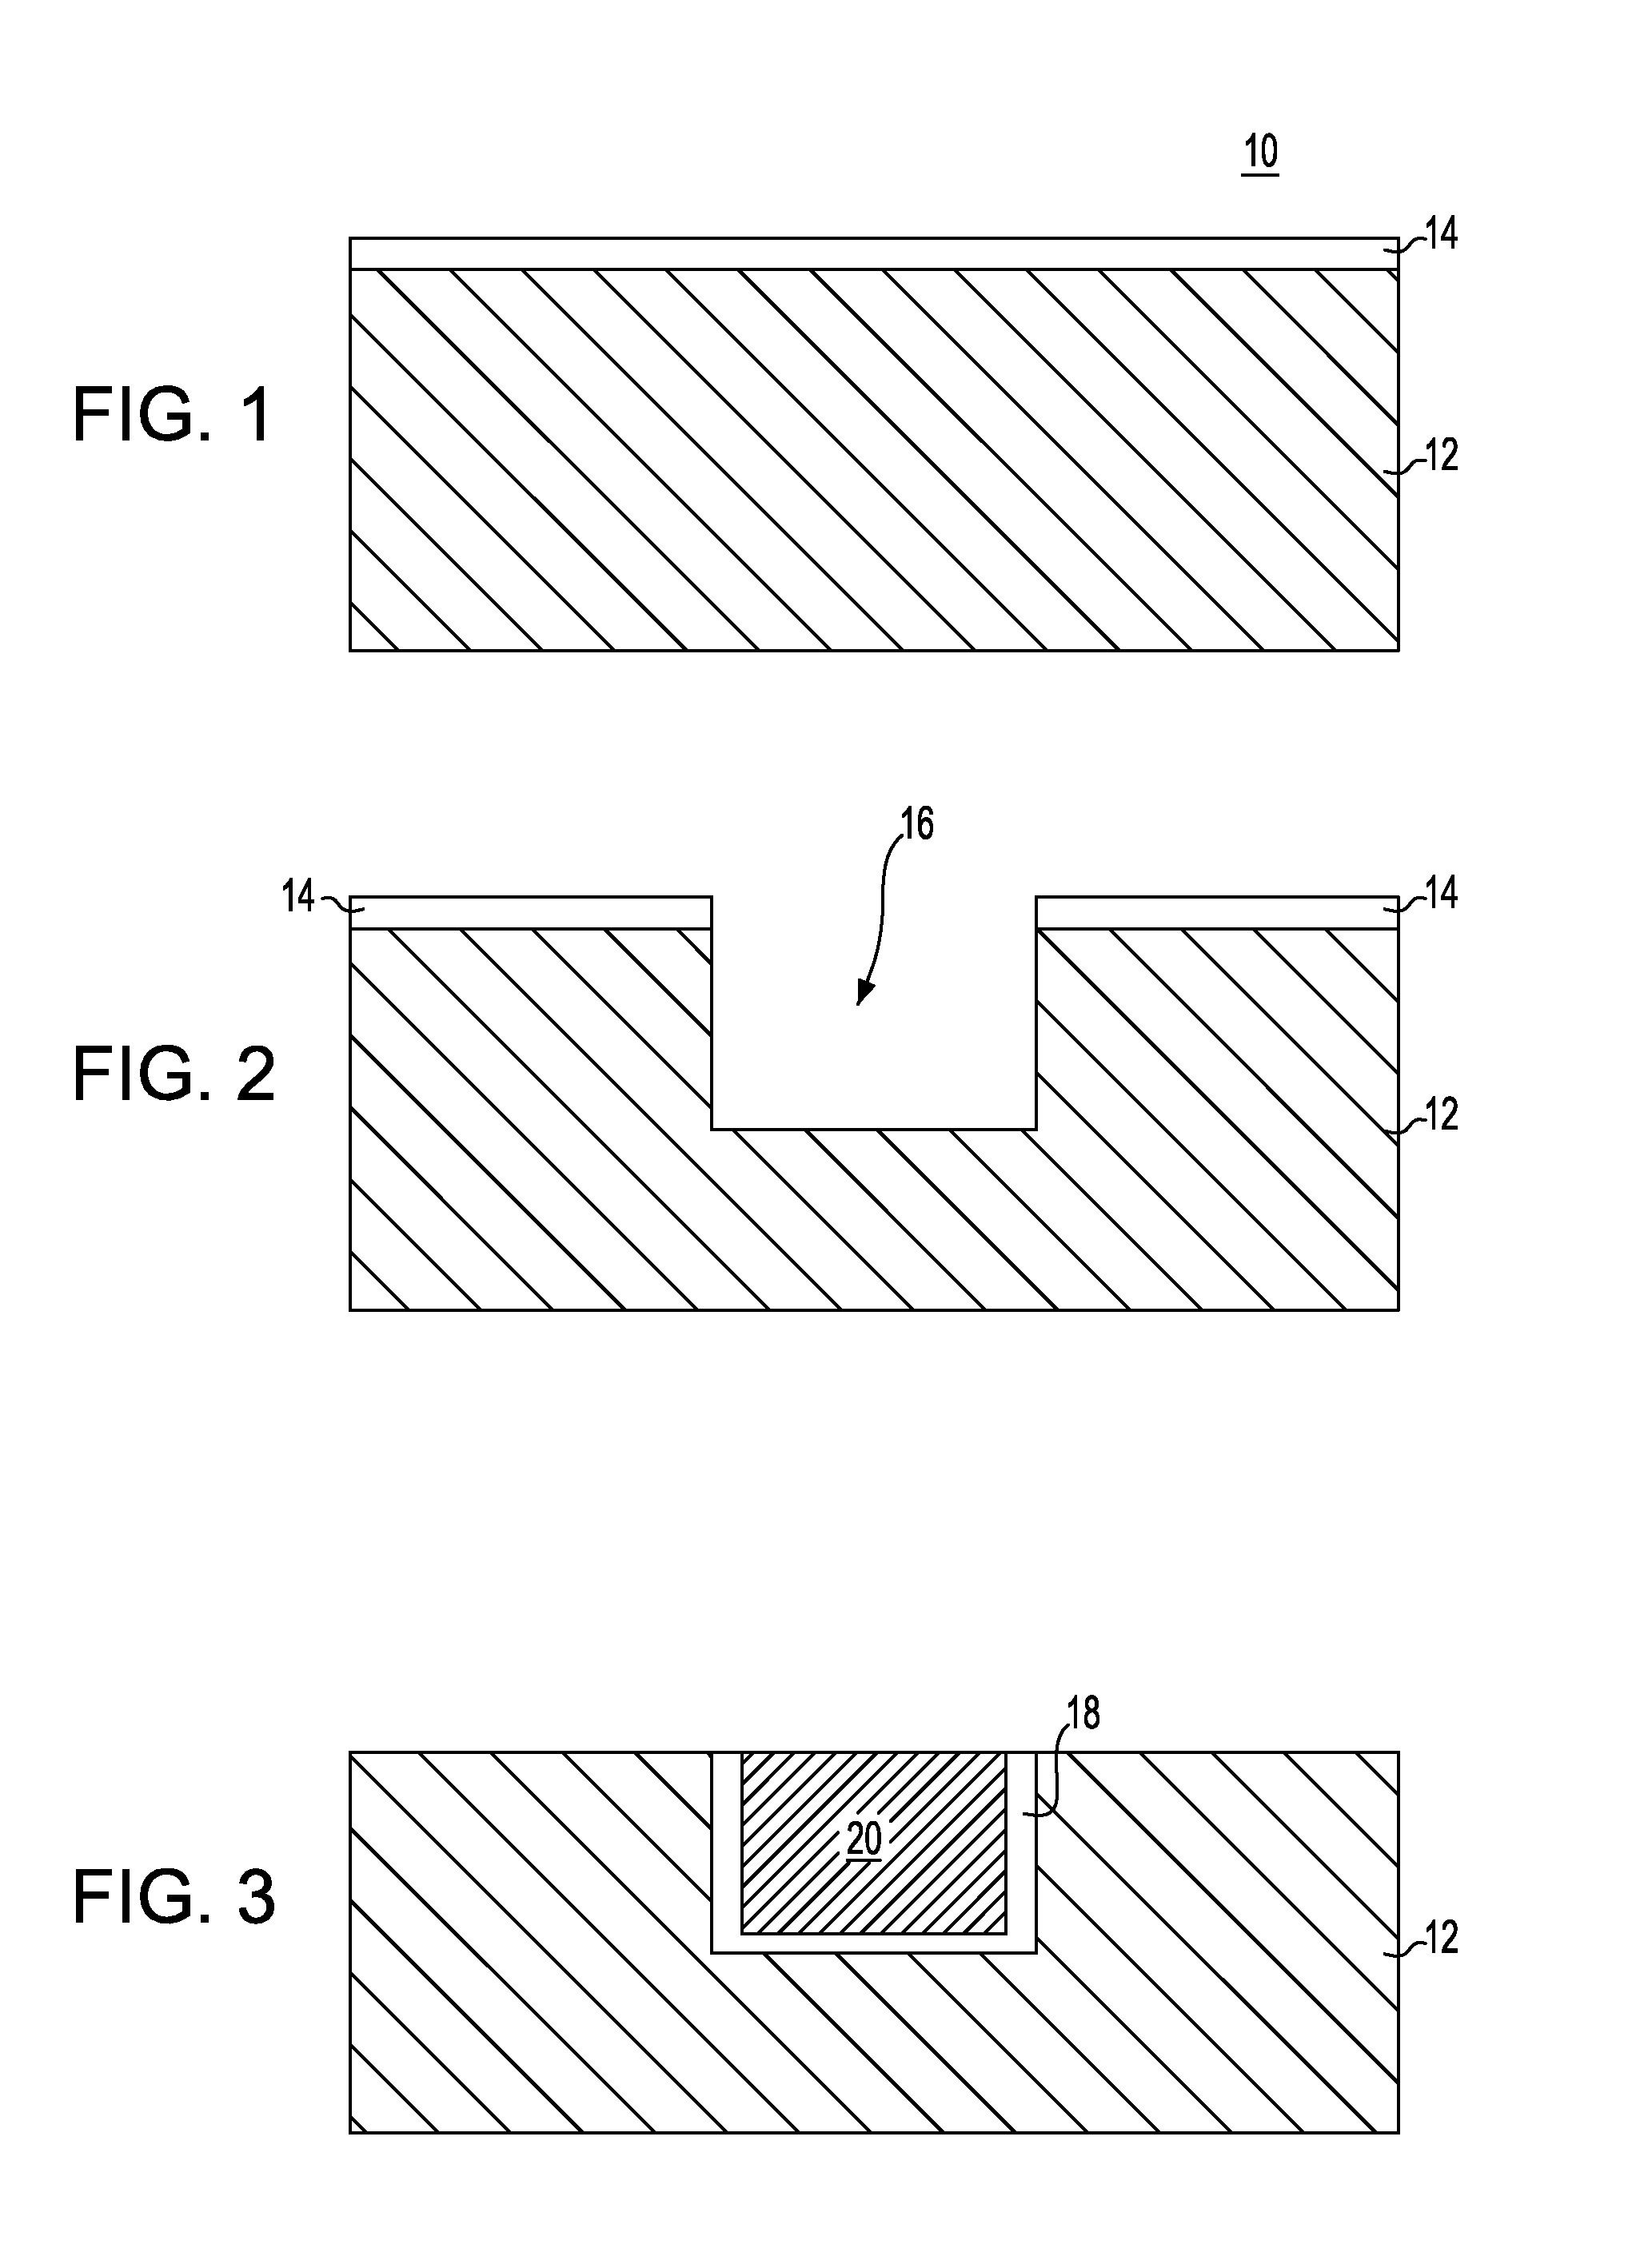 SELF-ALIGNED COMPOSITE M-MOx/DIELECTRIC CAP FOR Cu INTERCONNECT STRUCTURES